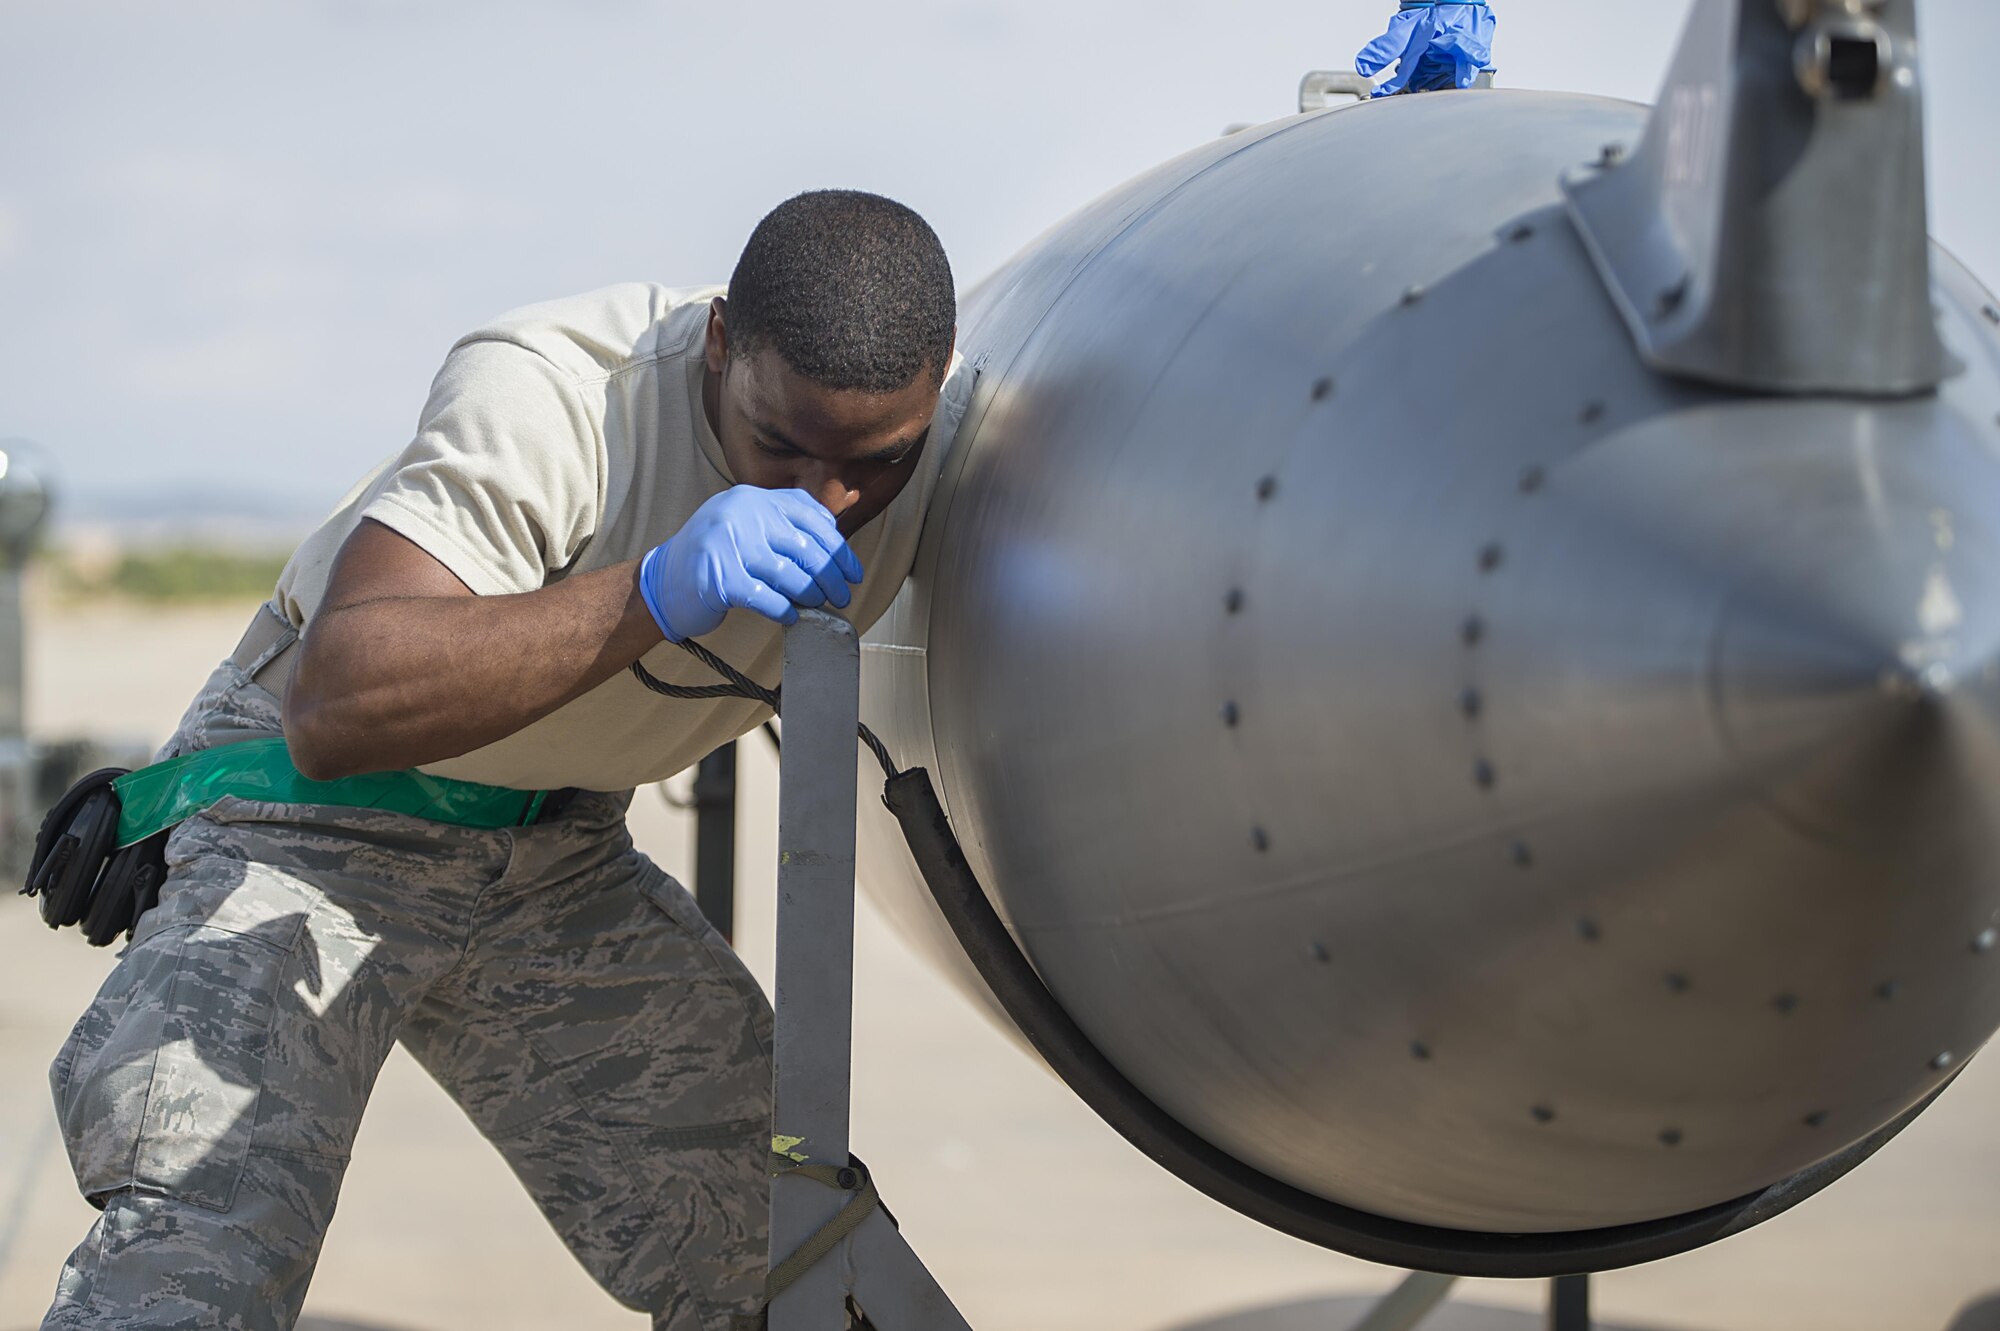 U.S. Air Force Senior Airman Casey Jackson, 48th Component Maintenance Squadron fuels systems journeyman, repairs a fuel tank during Tactical Leadership Programme 16-3 at Los Llanos Air Base, Spain, Sept. 26.  Training programs like TLP showcase how the U.S. works side-by-side with NATO Allies and partners every day, training to meet future security challenges as a unified force. (U.S. Air Force photo/ Staff Sgt. Emerson Nuñez)